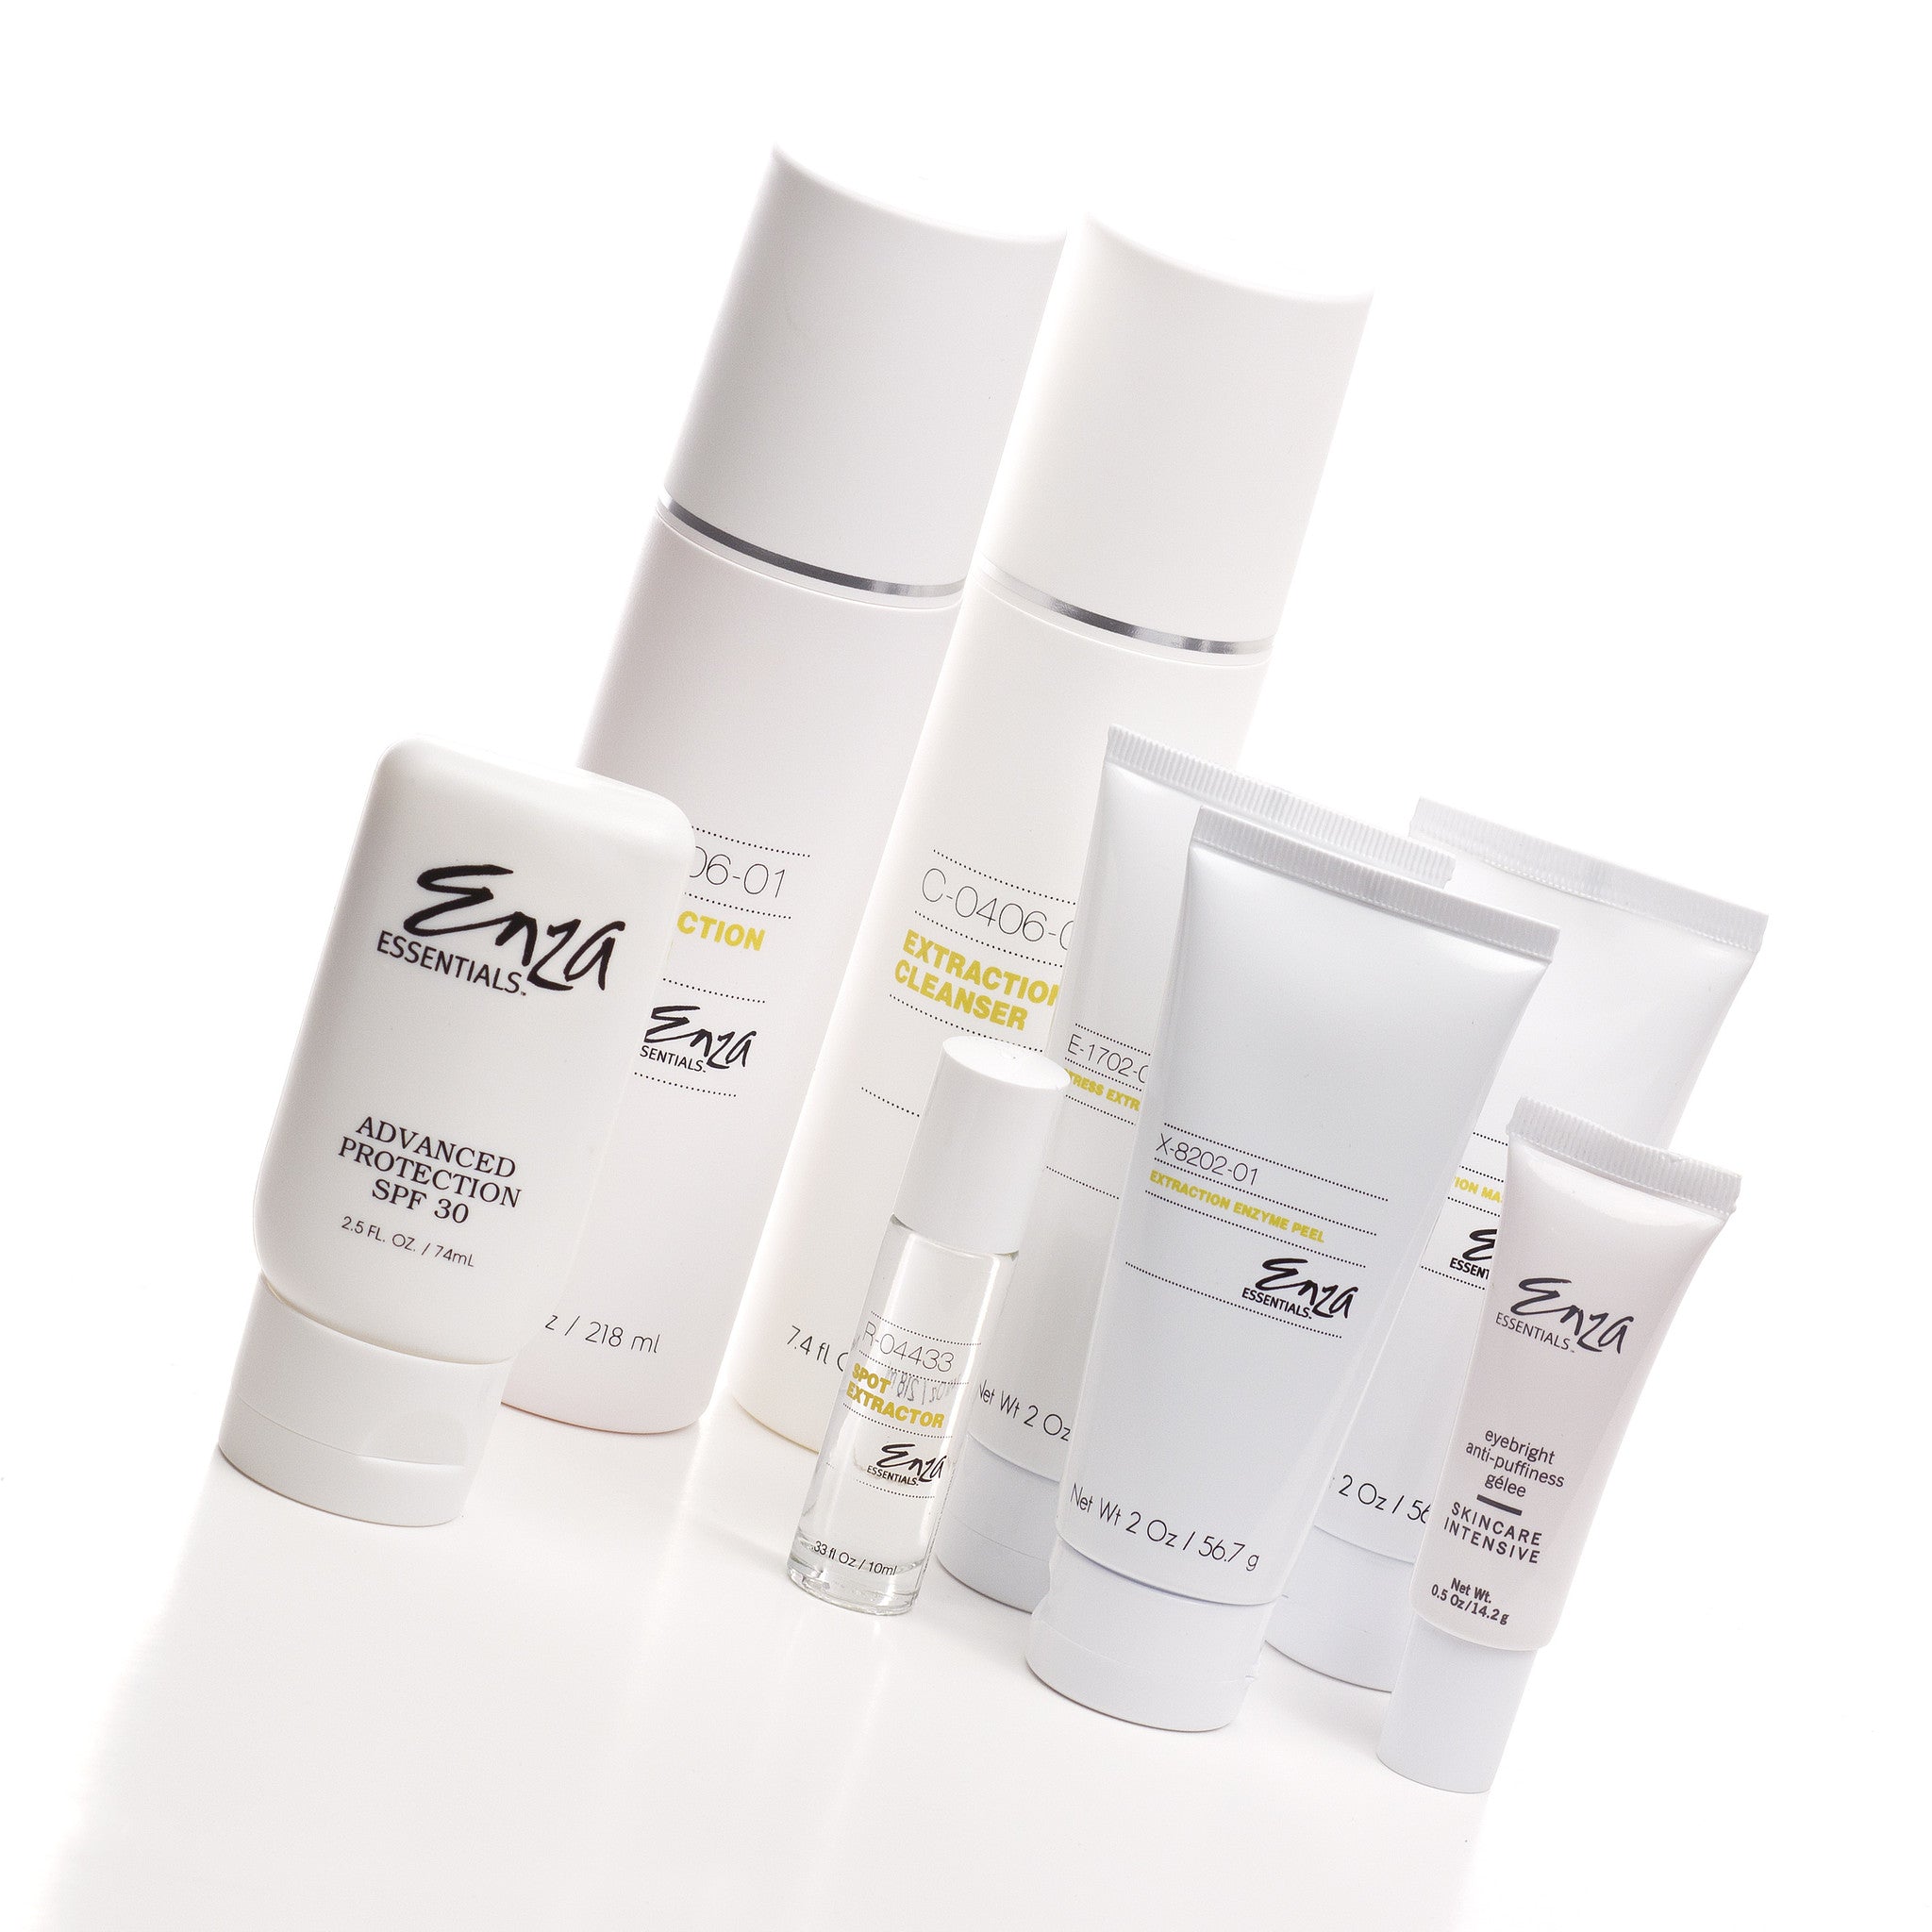 Acne and Blemishes Suite - Treats Acne Prone Oily Skin